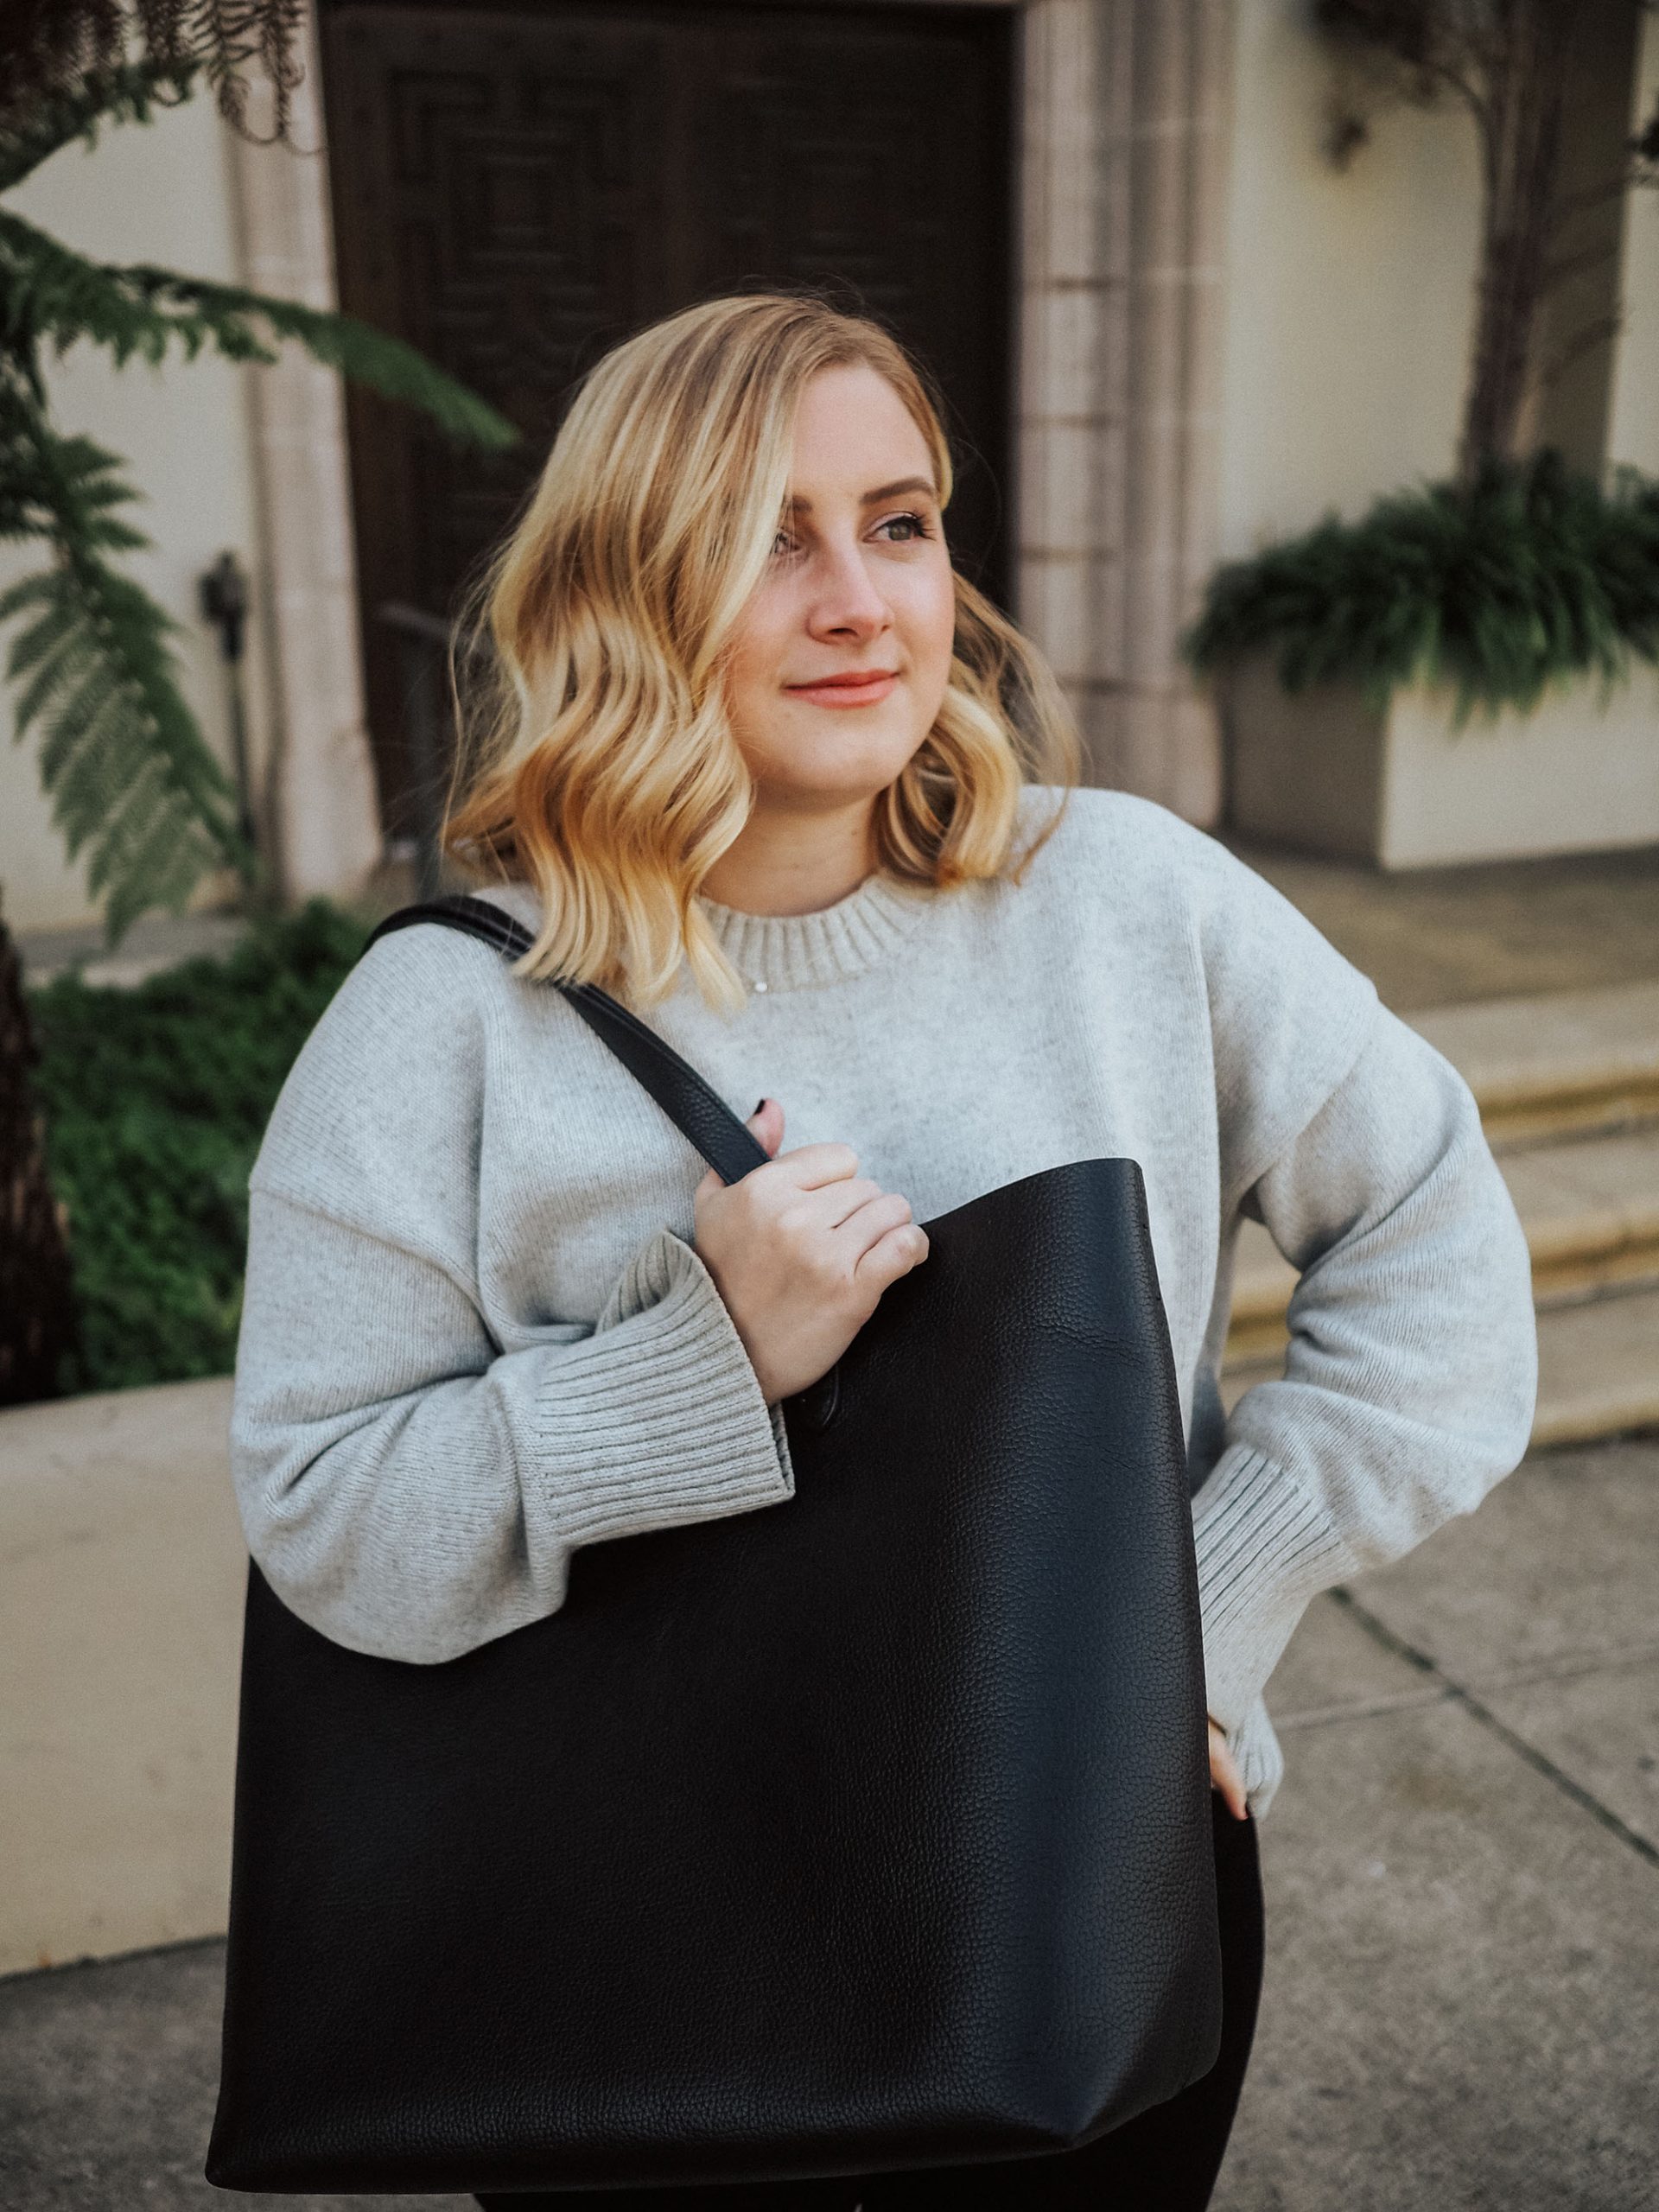 Curious which tote is better, the Cuyana, Everlane, or Madewell totes? This post is for you! Check out this full tote comparison blog post.